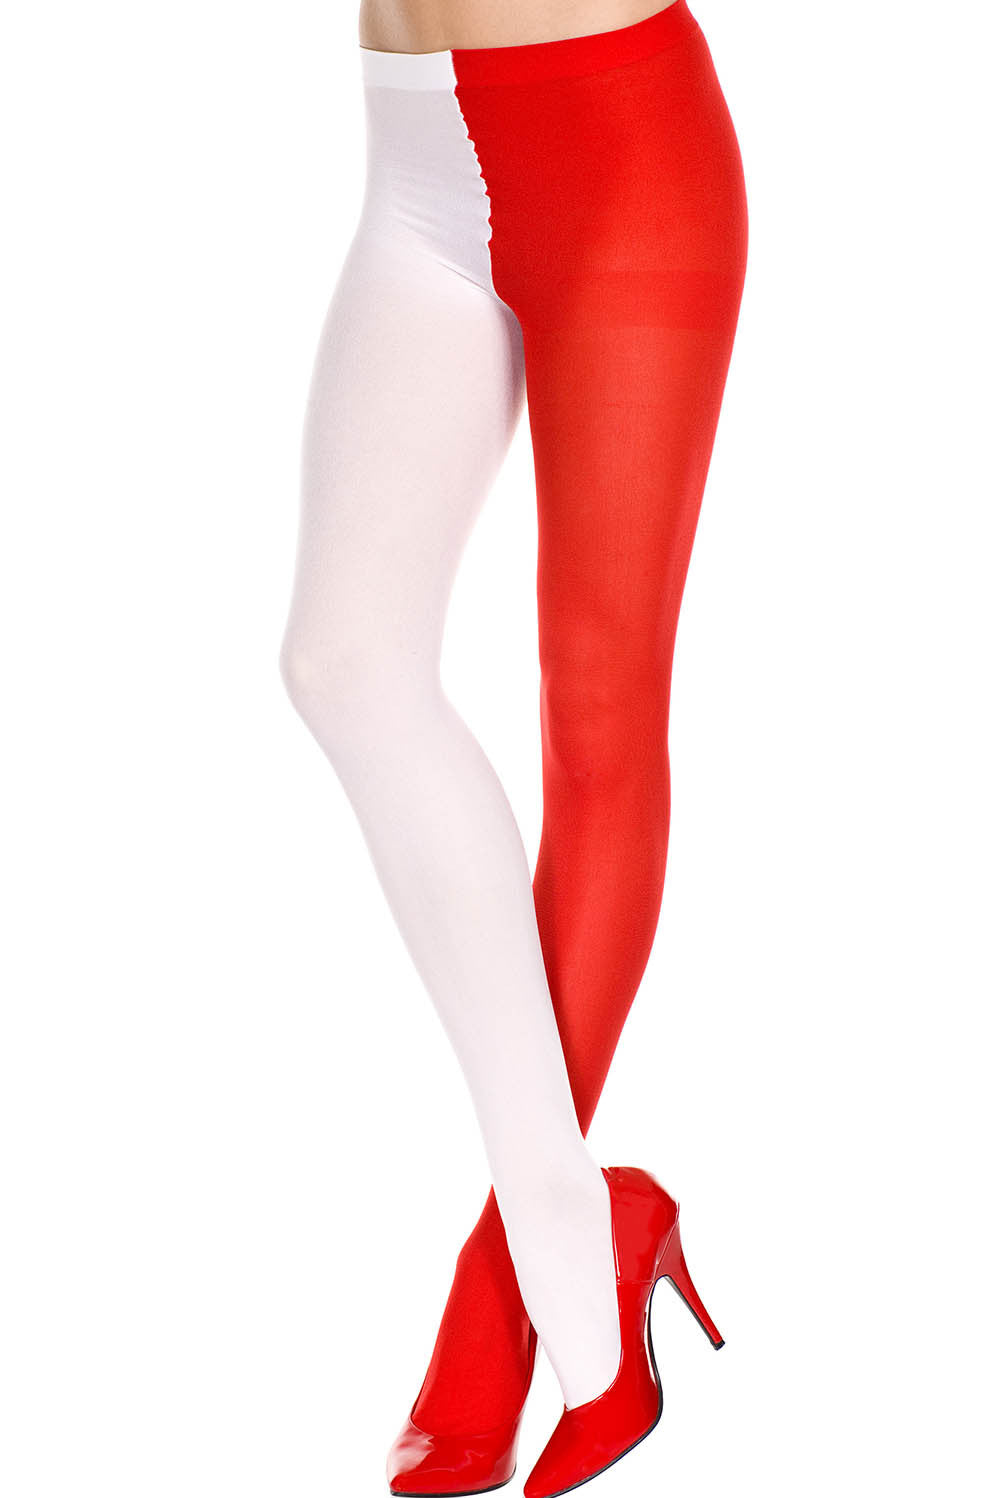 Red and White Opaque Pantyhose